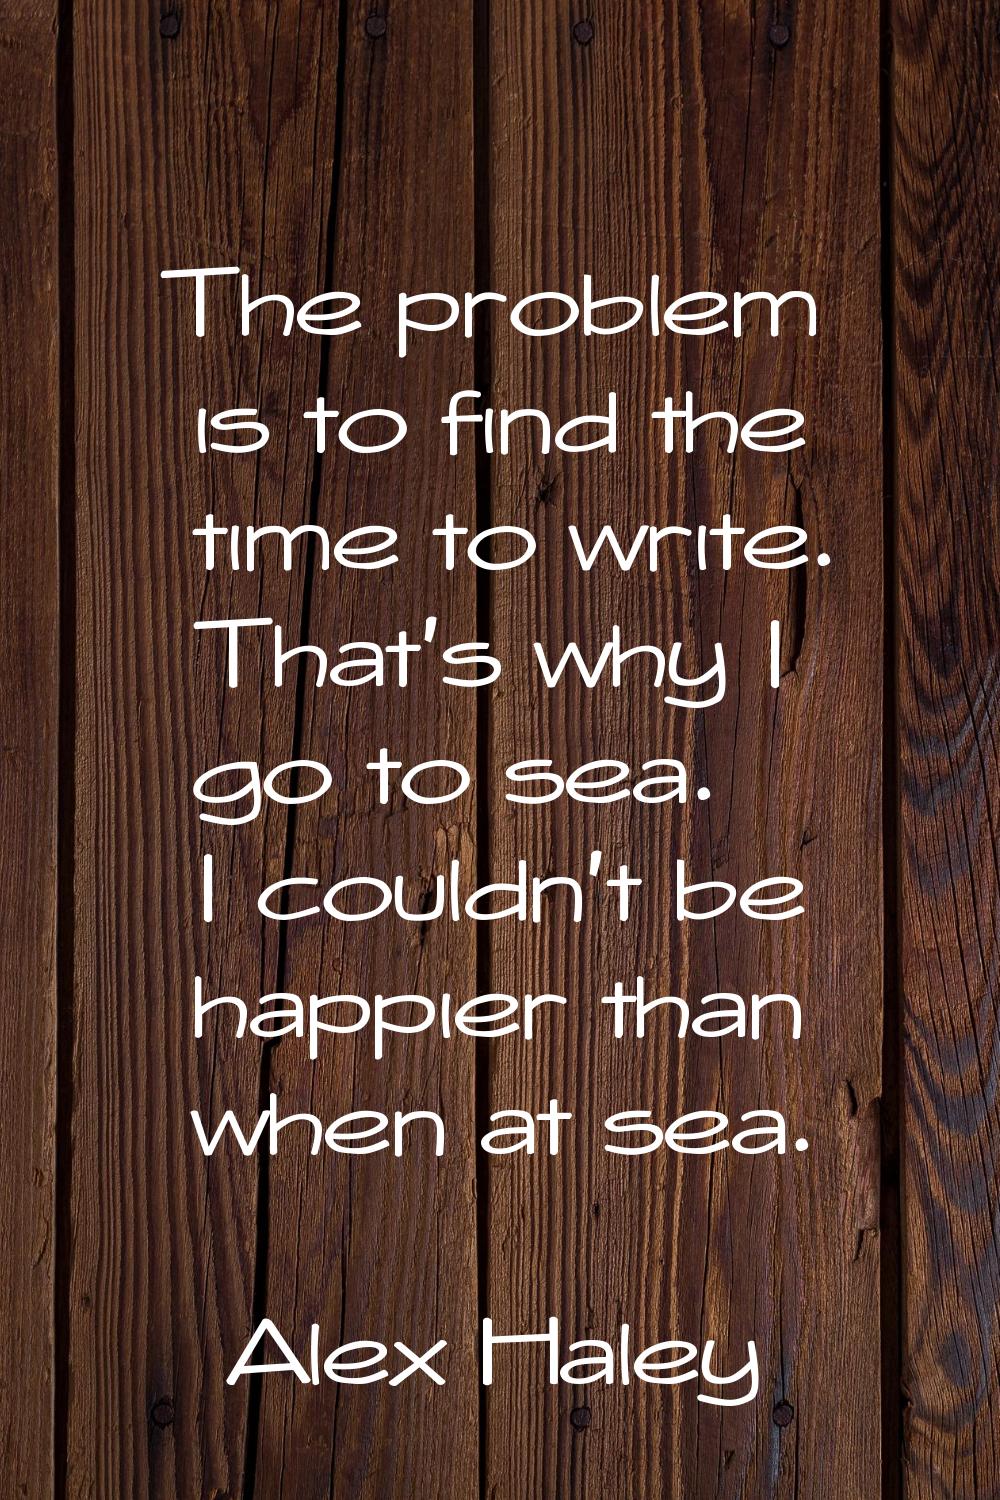 The problem is to find the time to write. That's why I go to sea. I couldn't be happier than when a